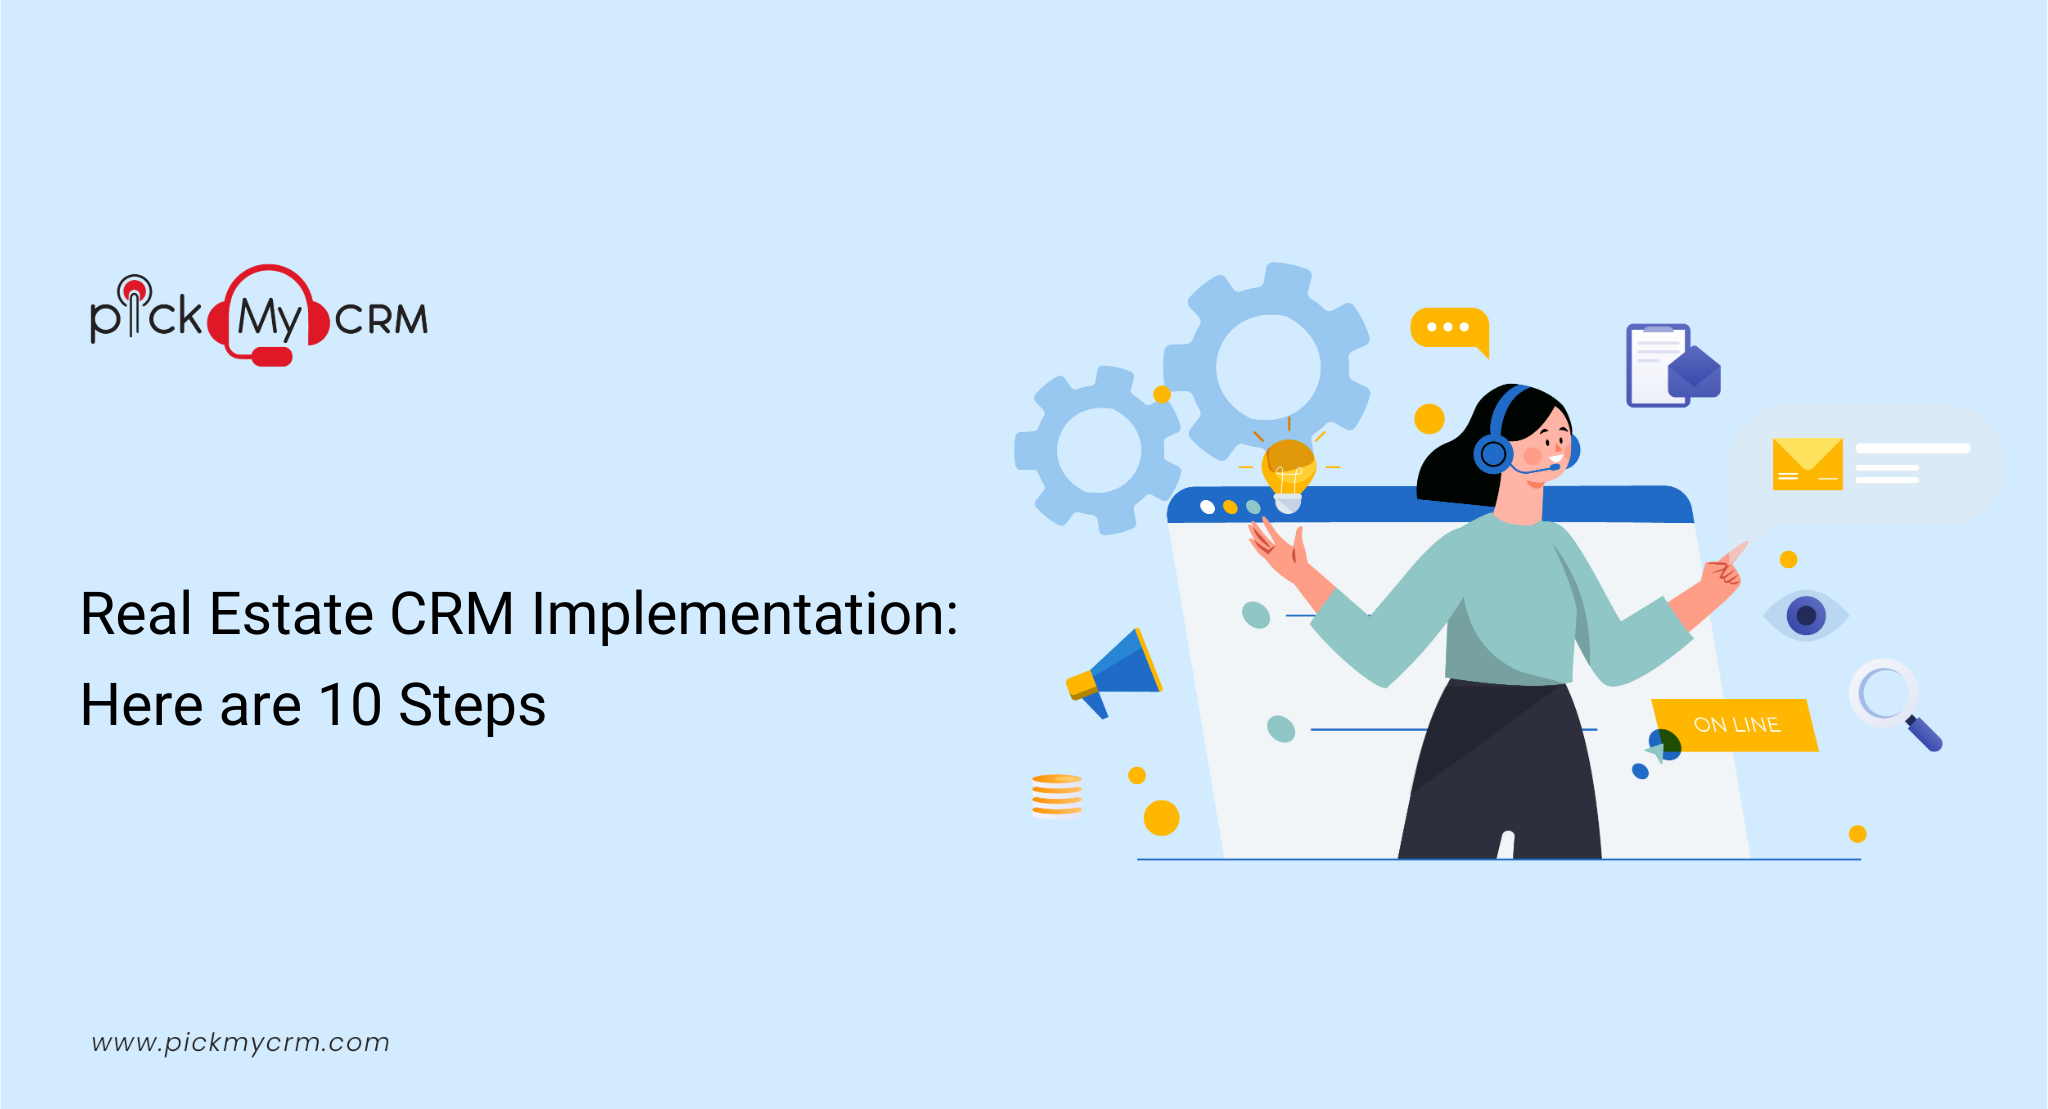 Real Estate CRM Implementation: Here are 10 Steps